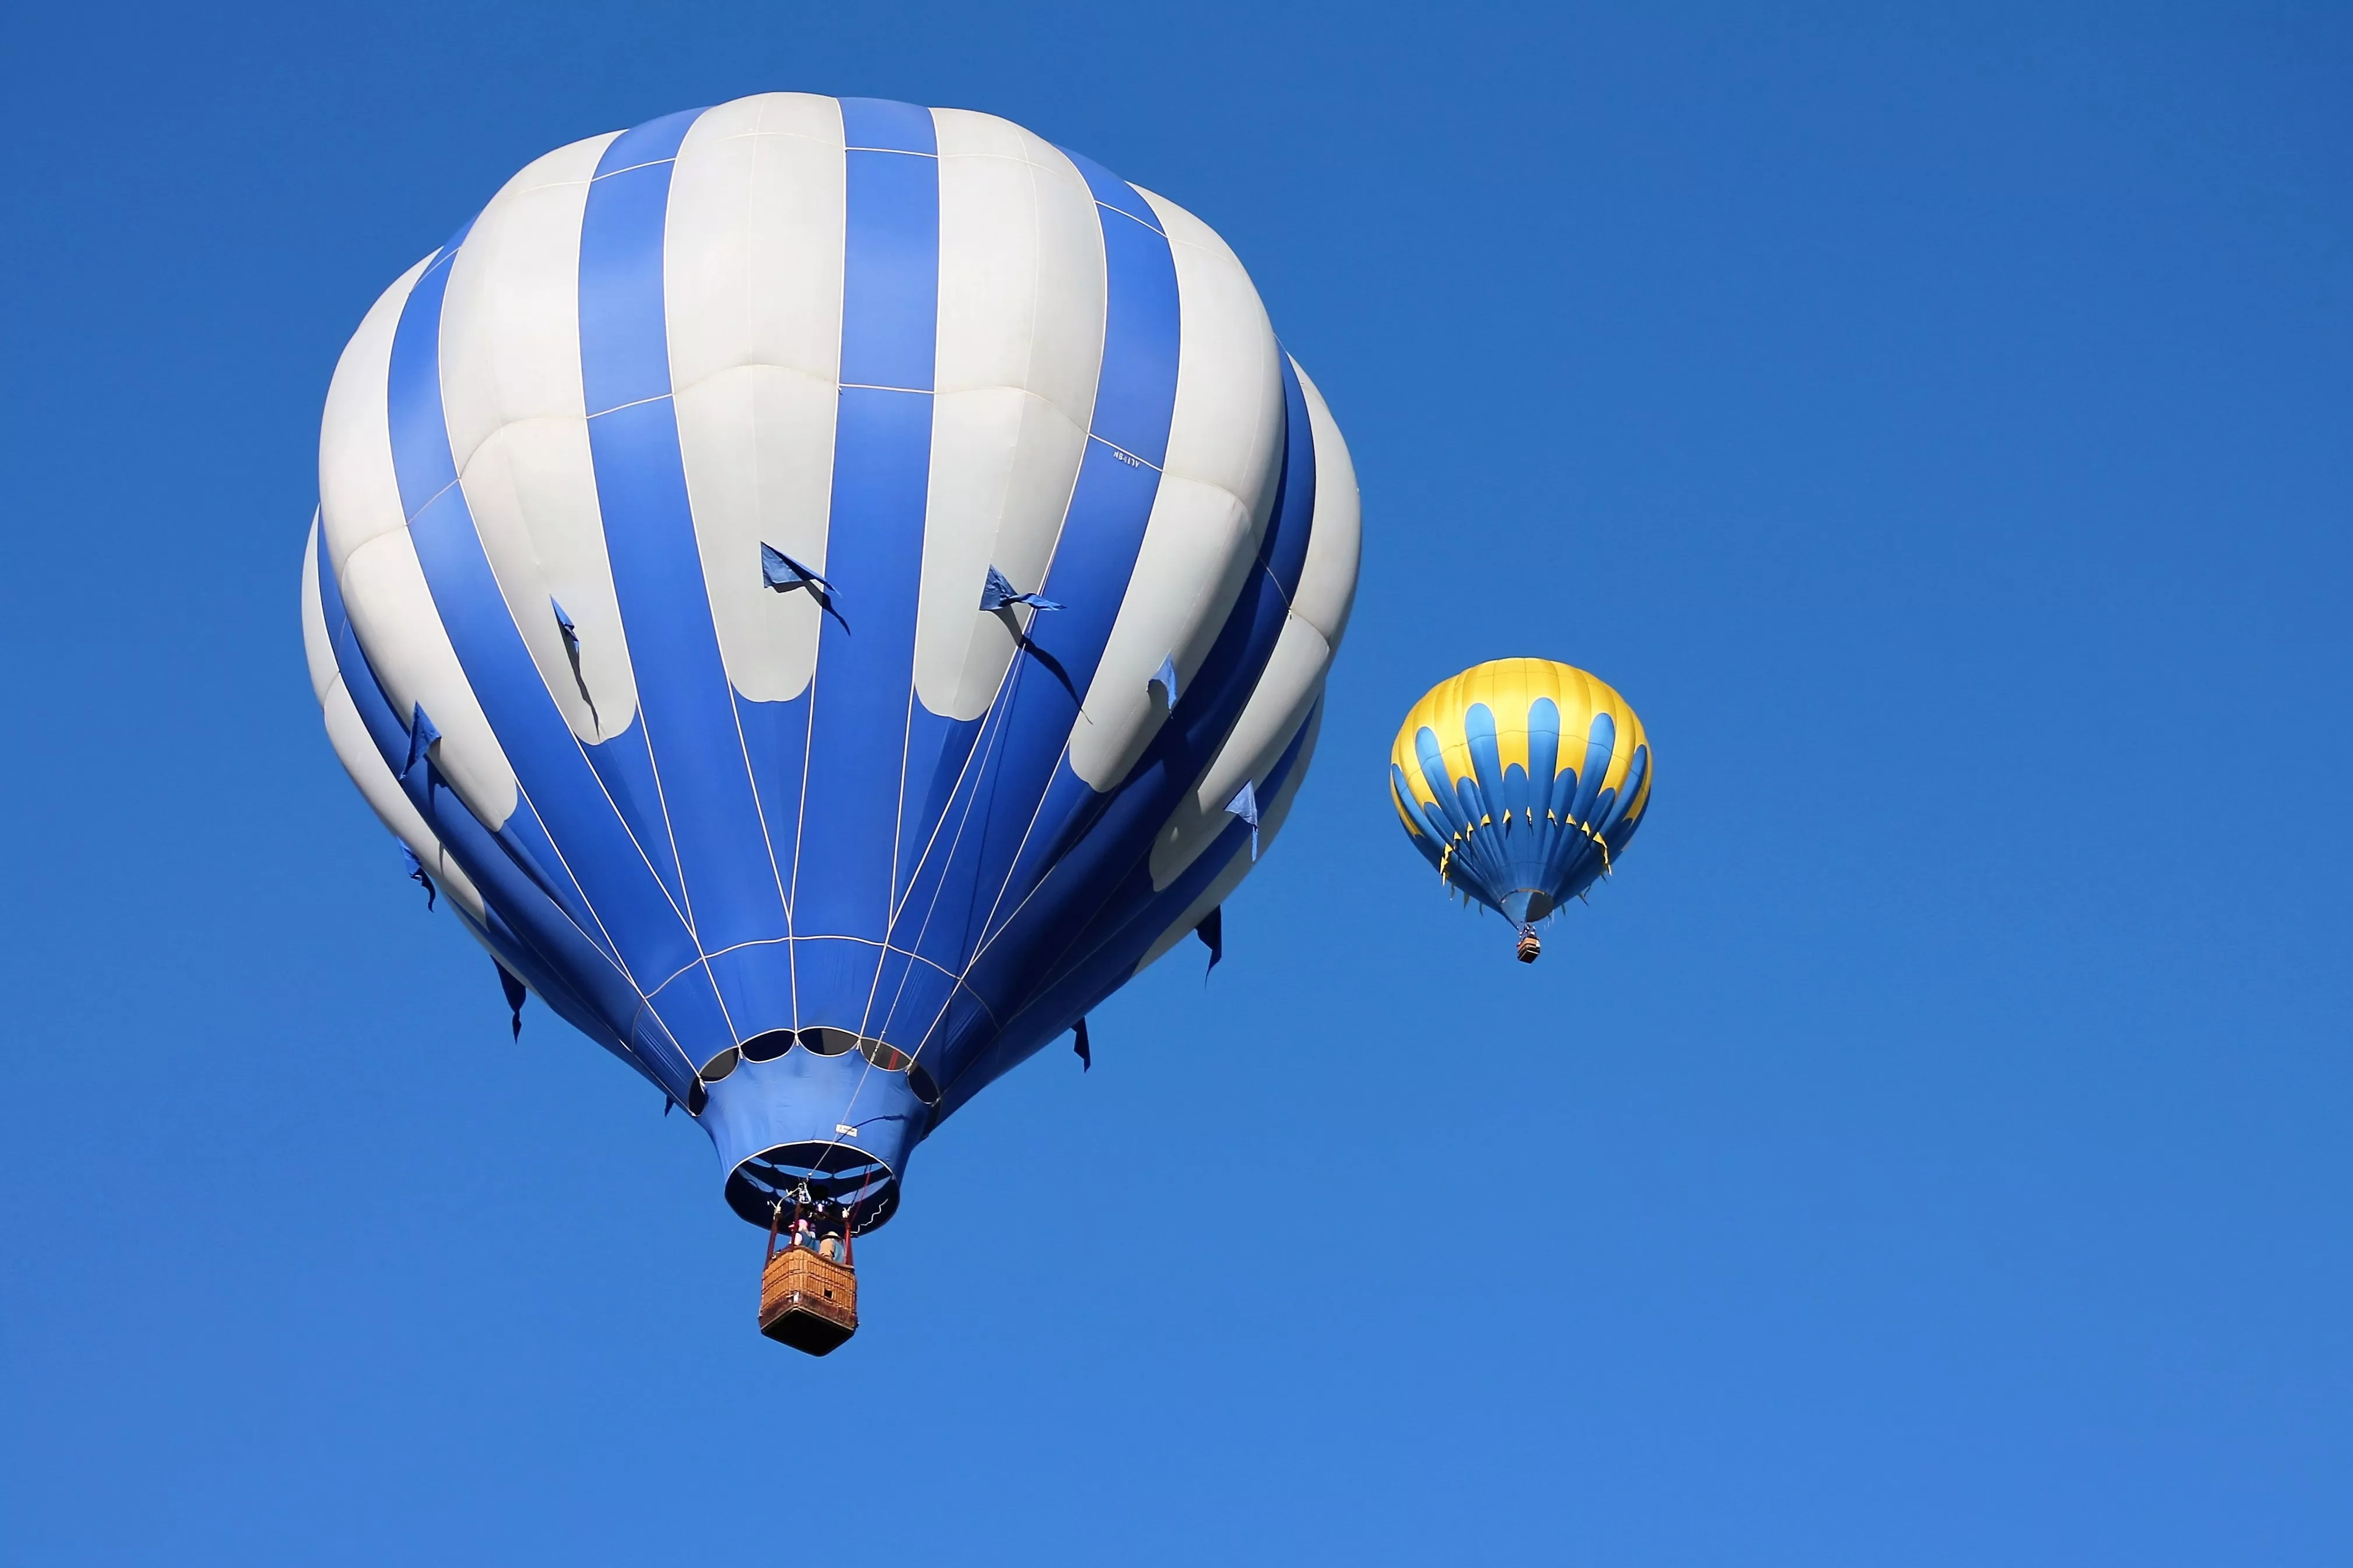 Sky Balloons Mexico in Mexico, North America | Hot Air Ballooning - Rated 7.8